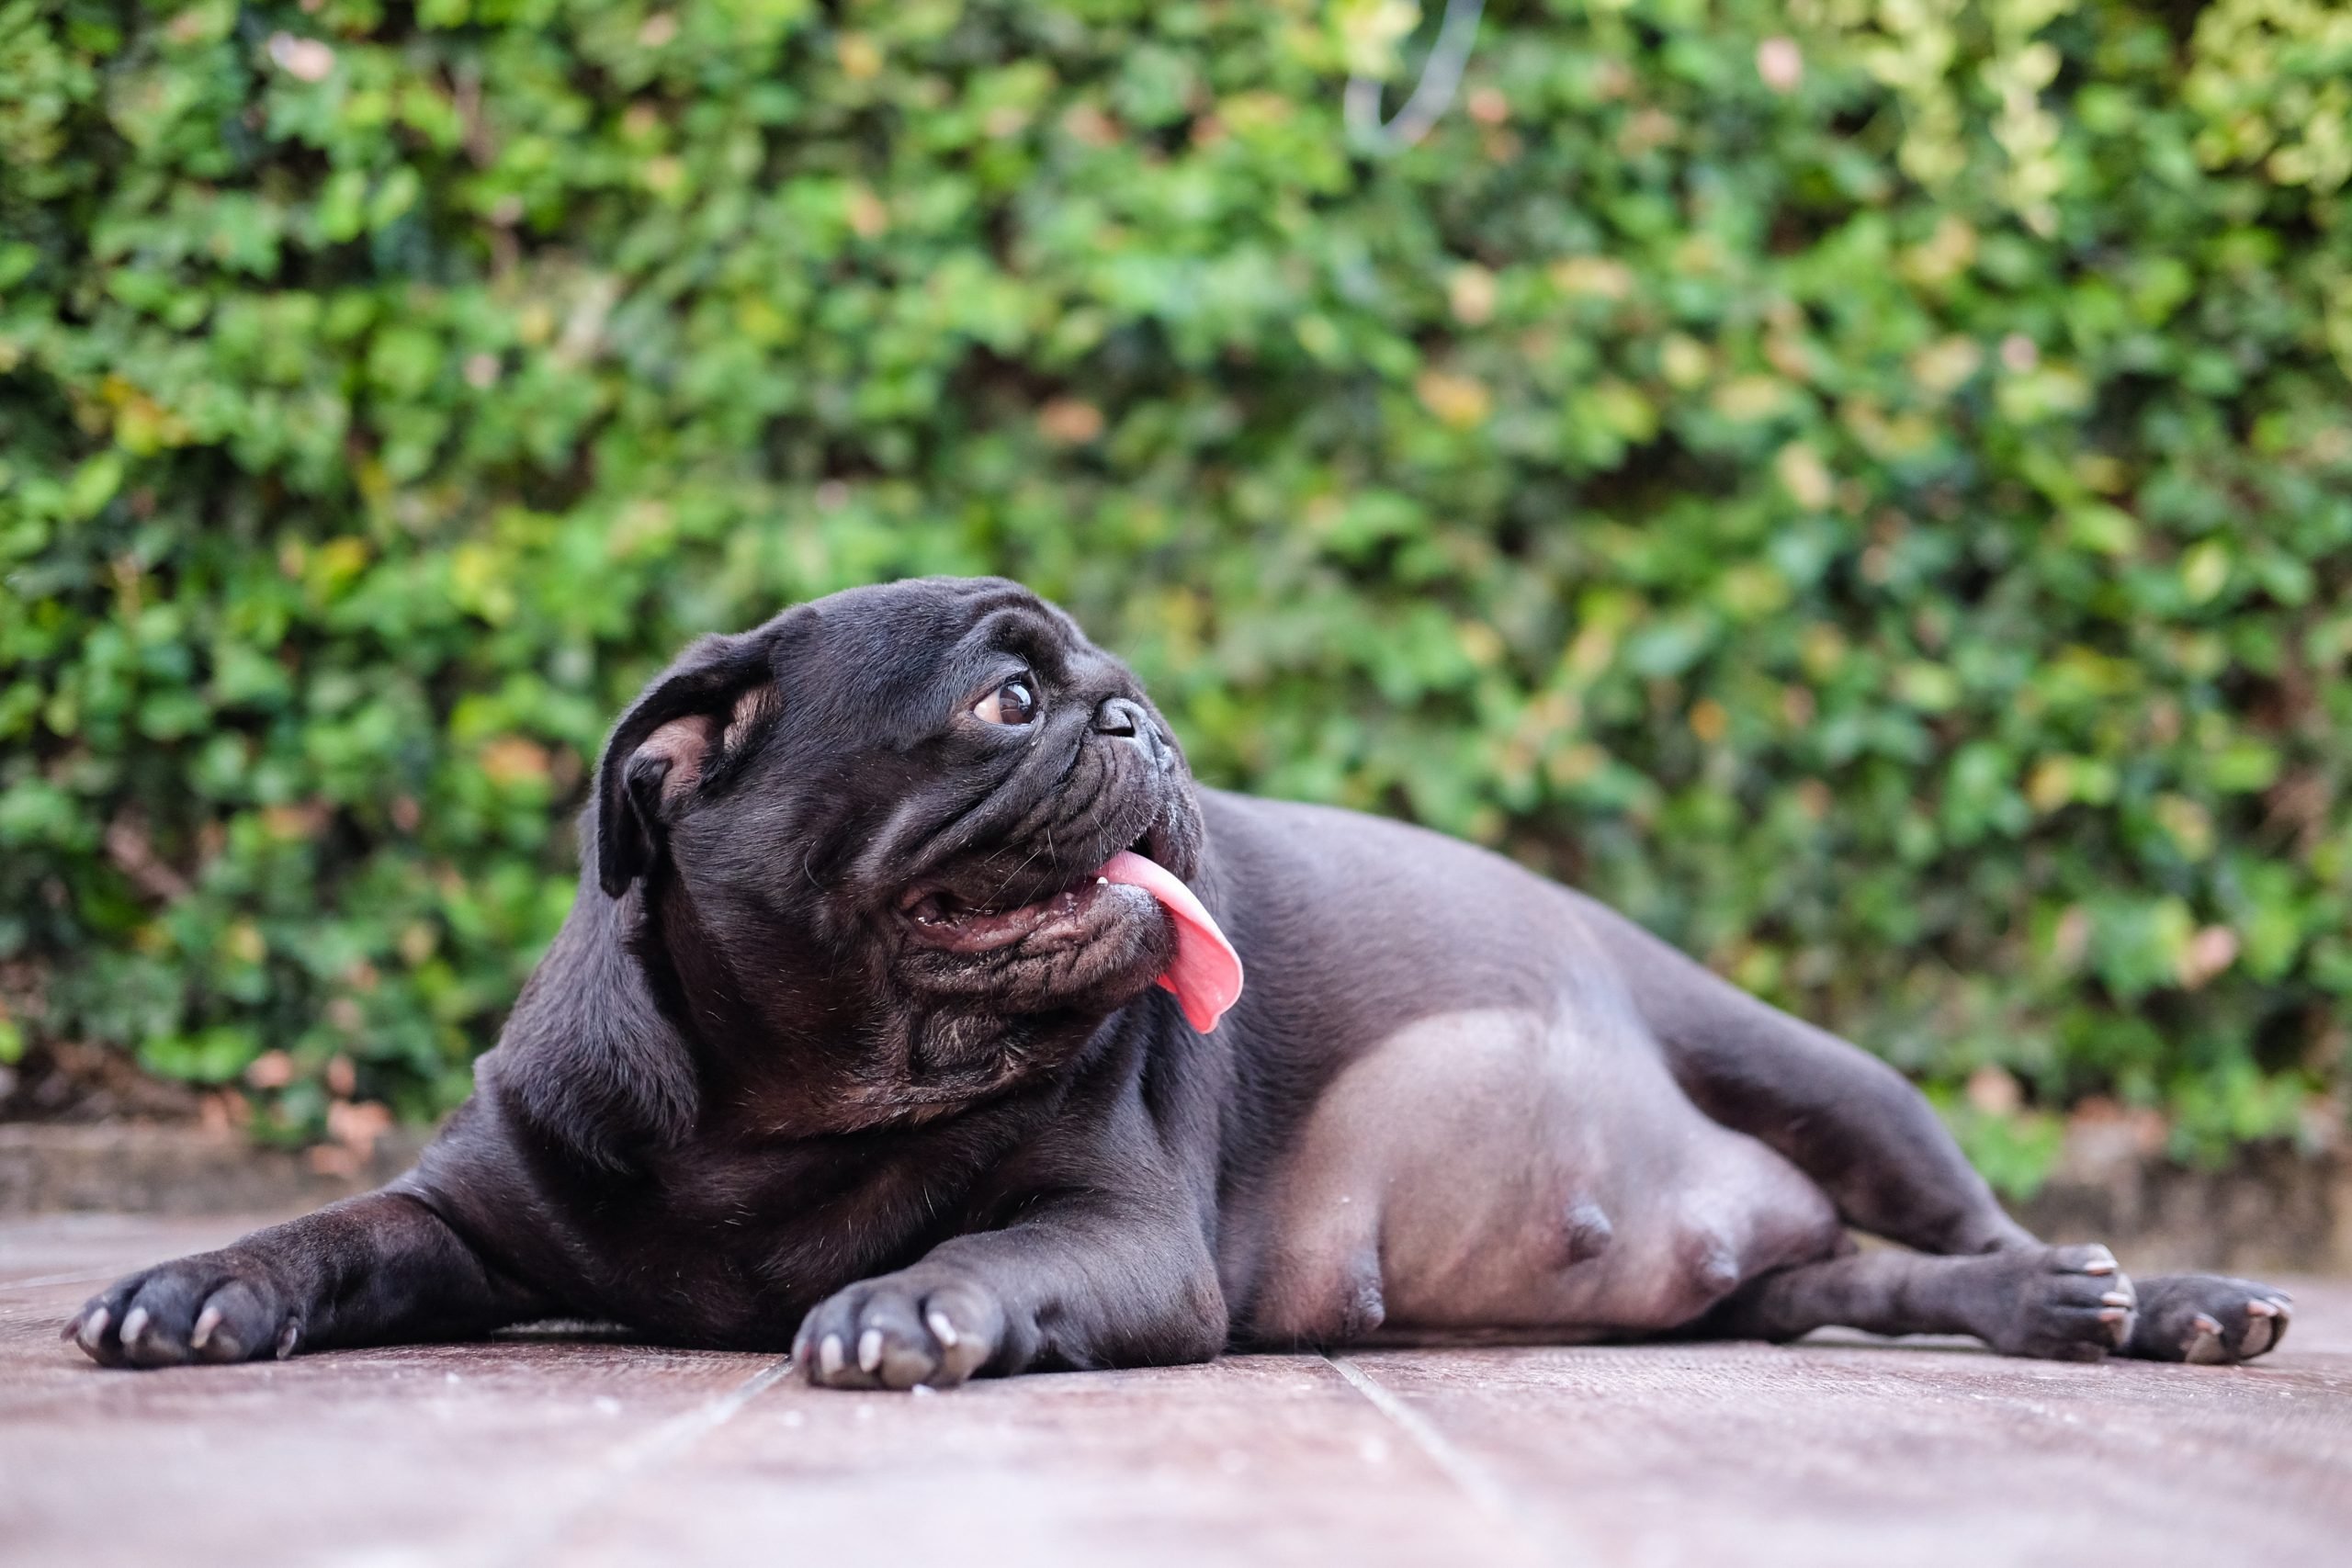 How Long Does It Take for a Dog to Have Puppies? | Reader's Digest